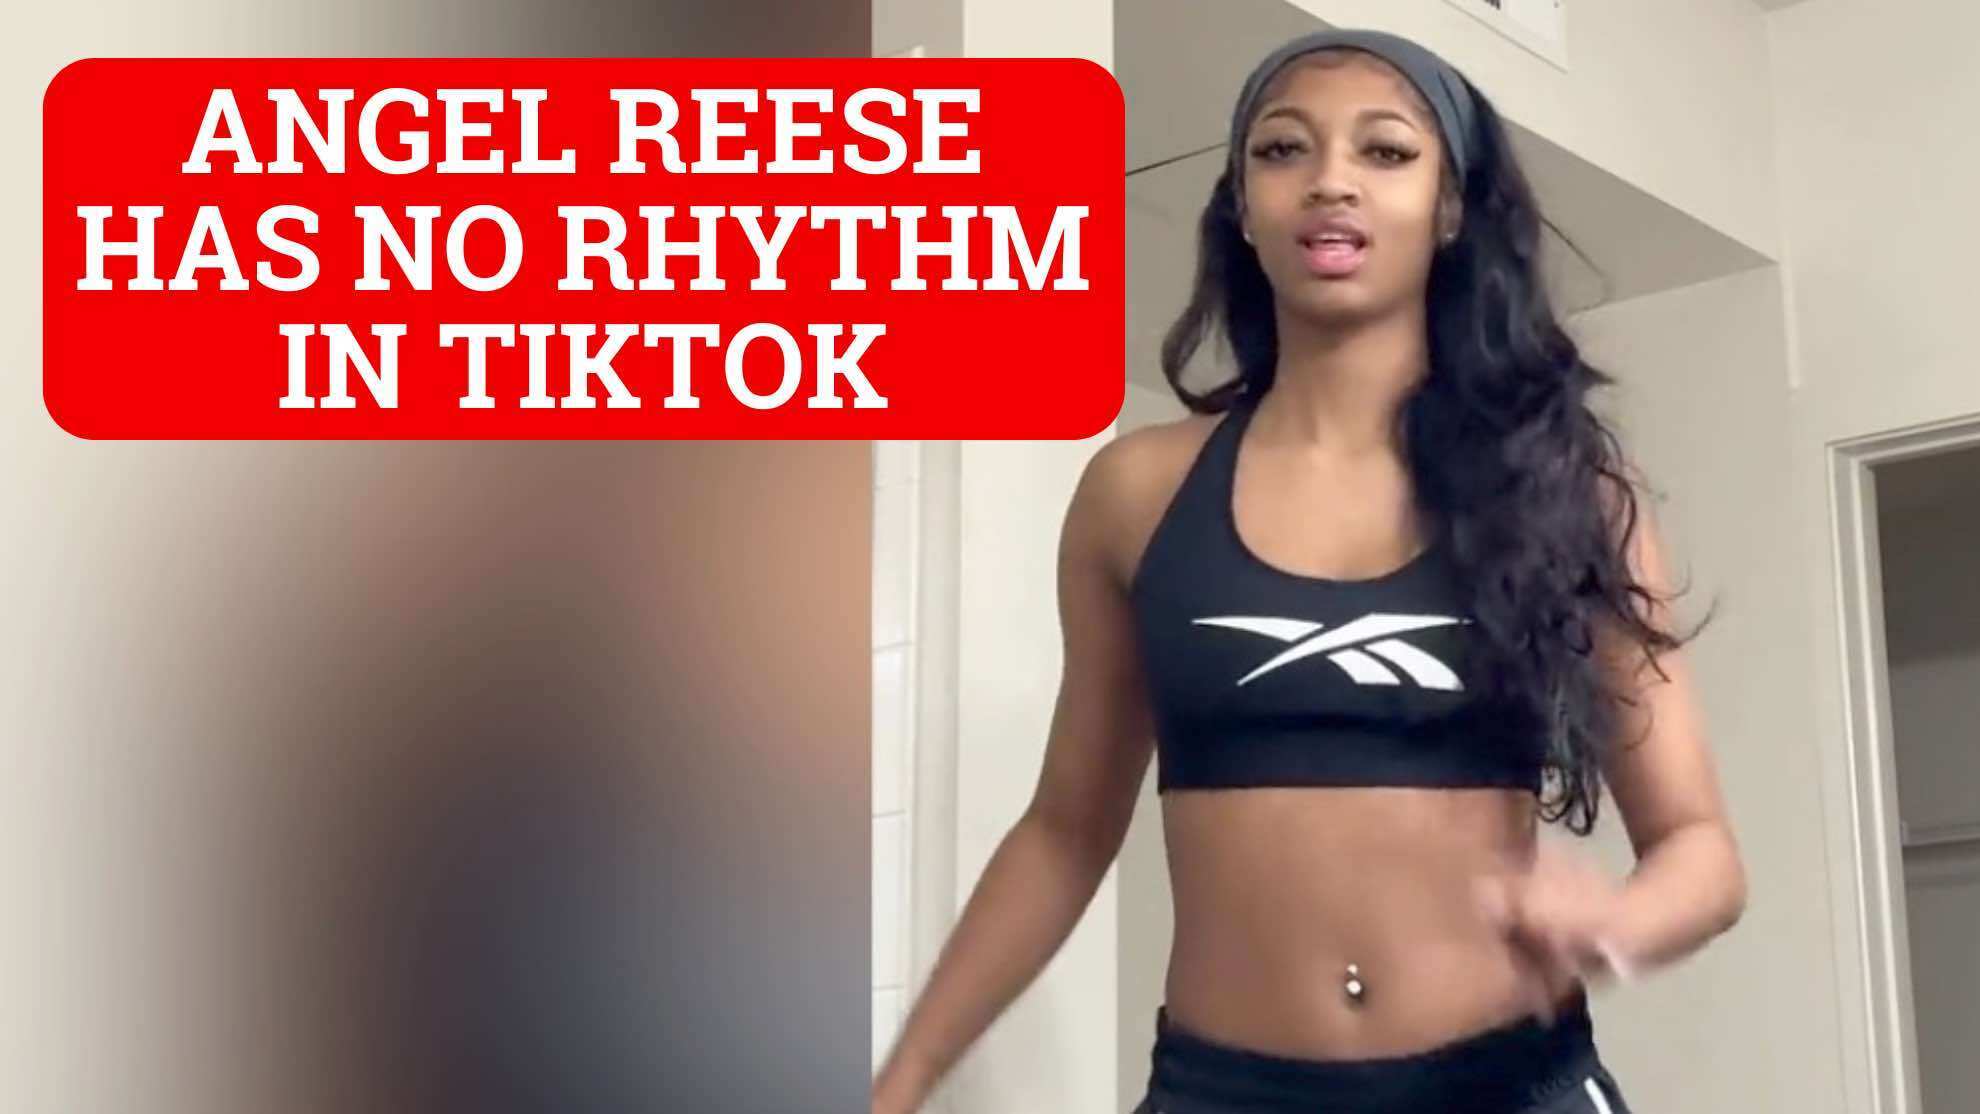 Angel Reeses TikTok dance with a surprising lack of rhythm